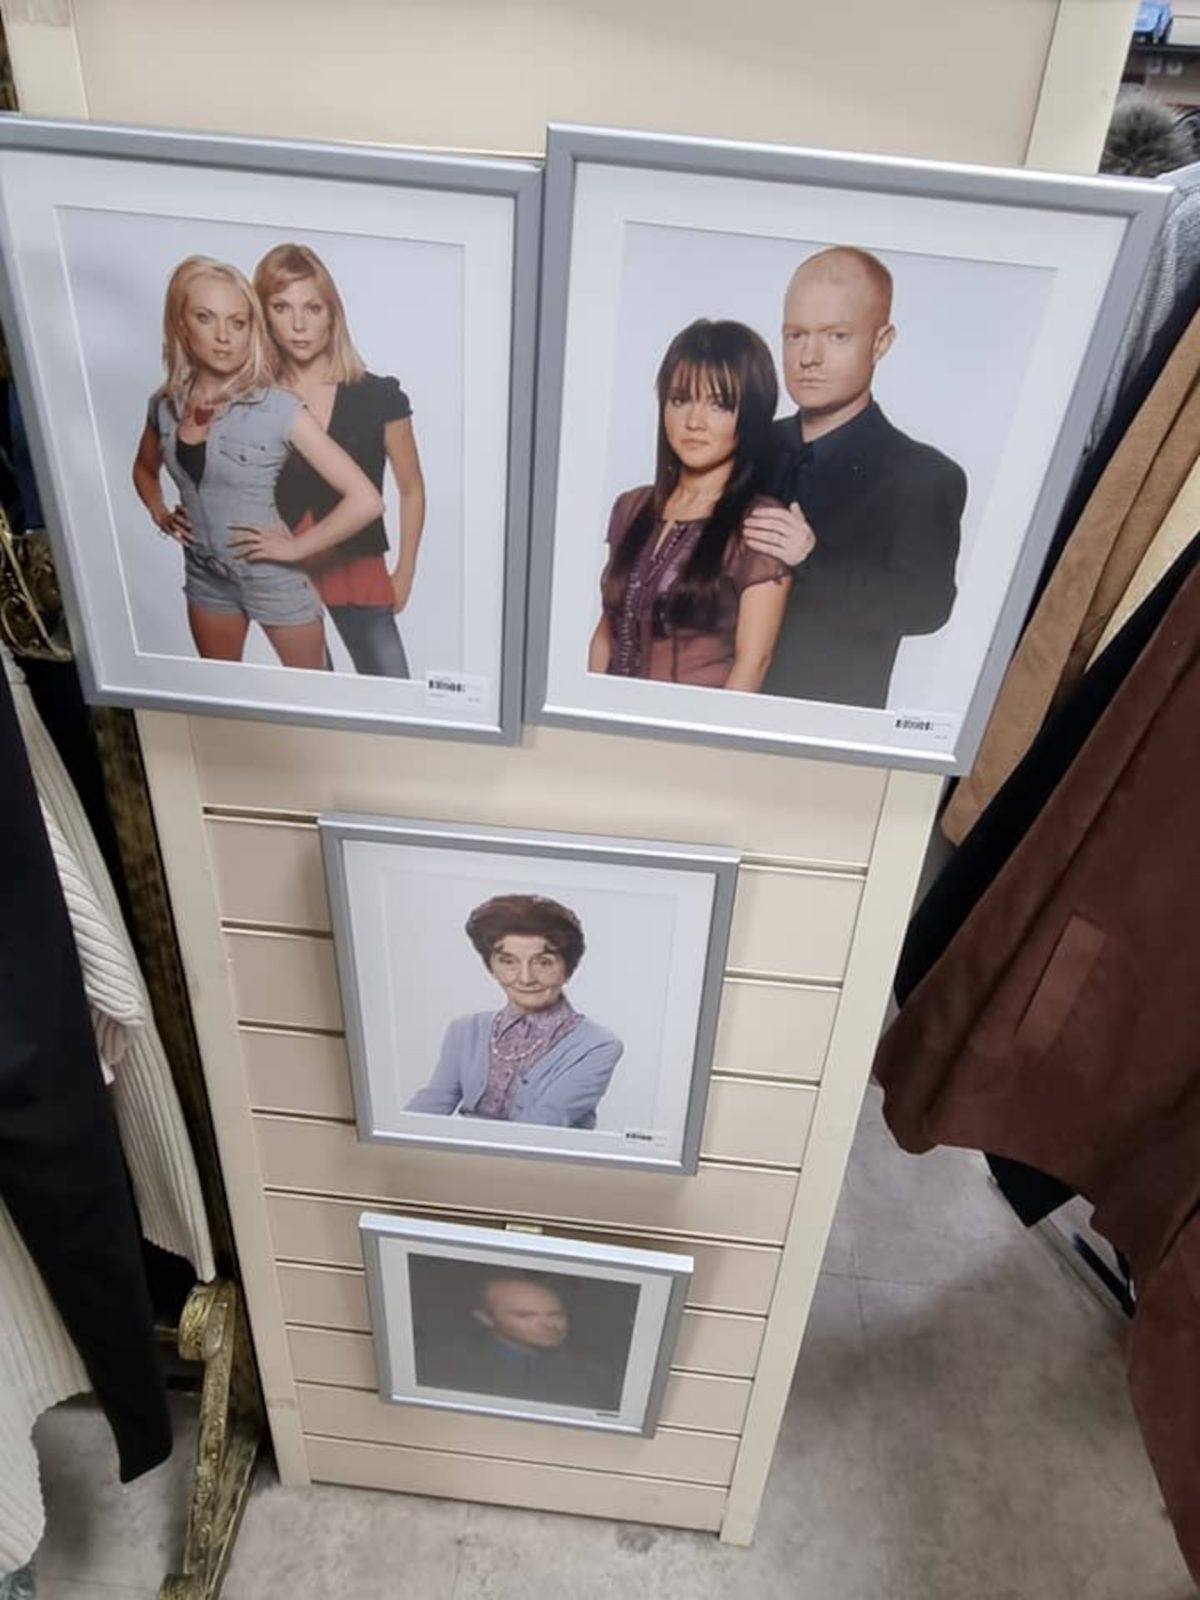 Eastenders character photos on the wall of the charity shop